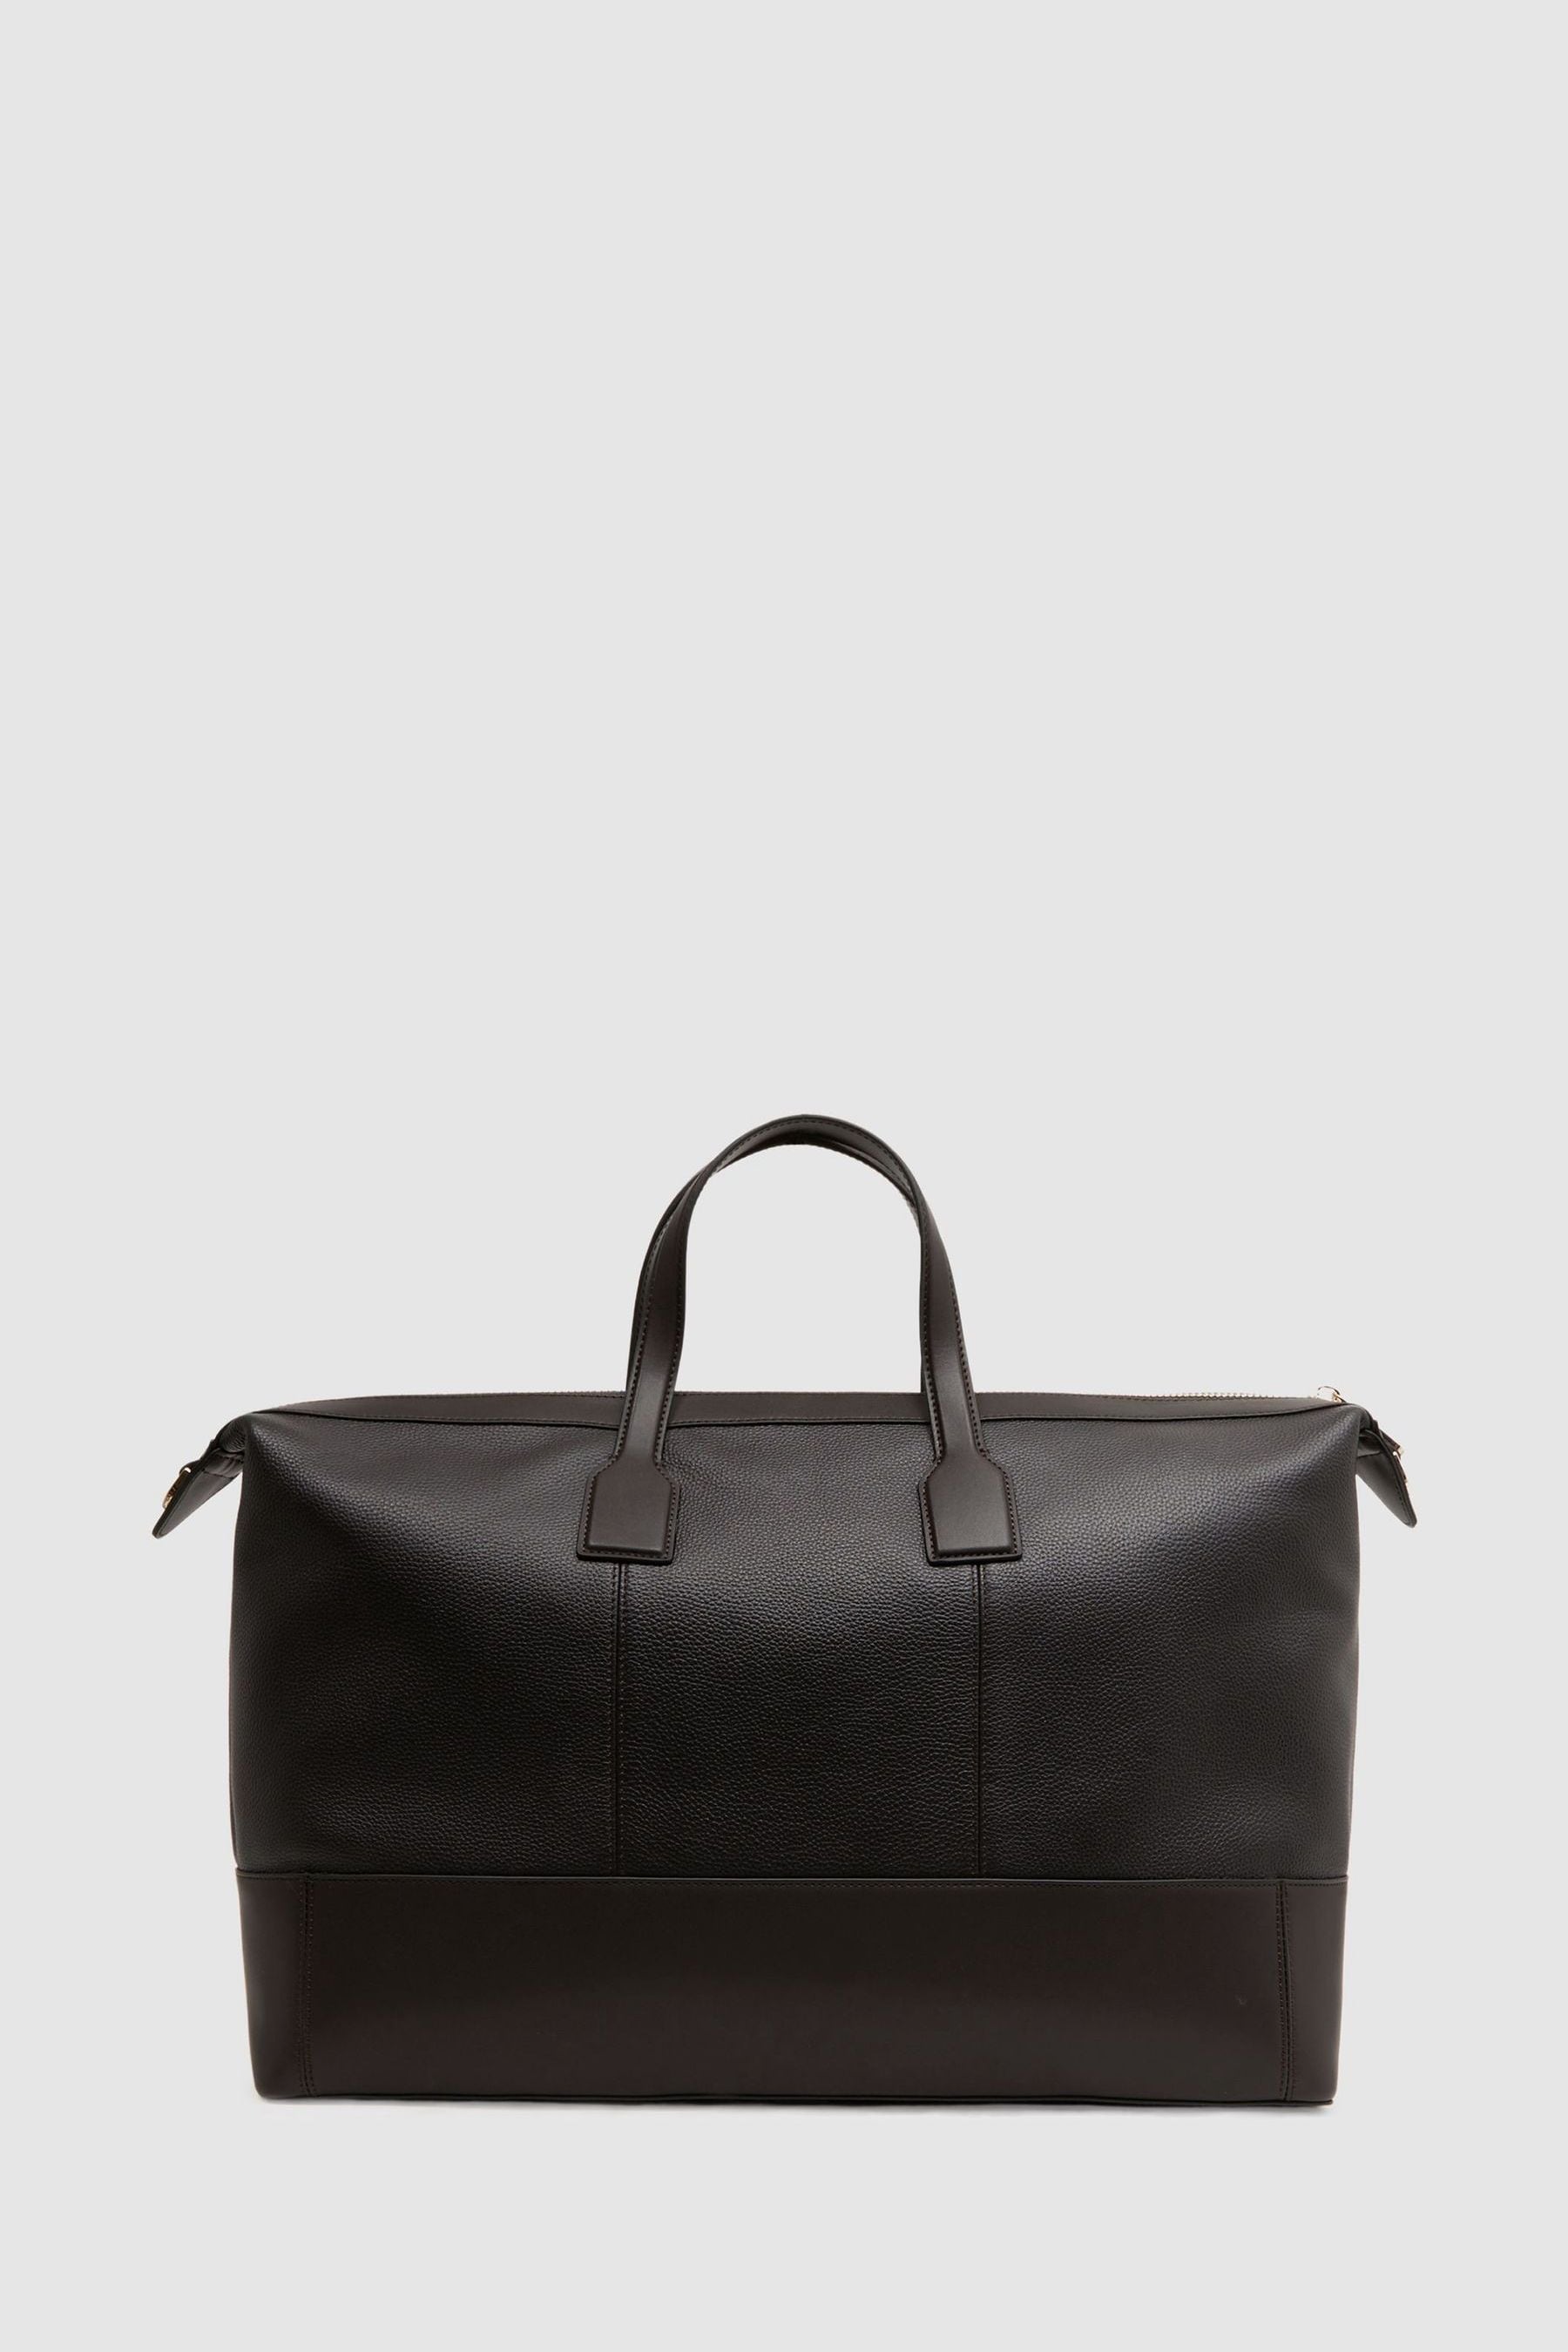 Reiss Carter - Chocolate Leather Holdall, One